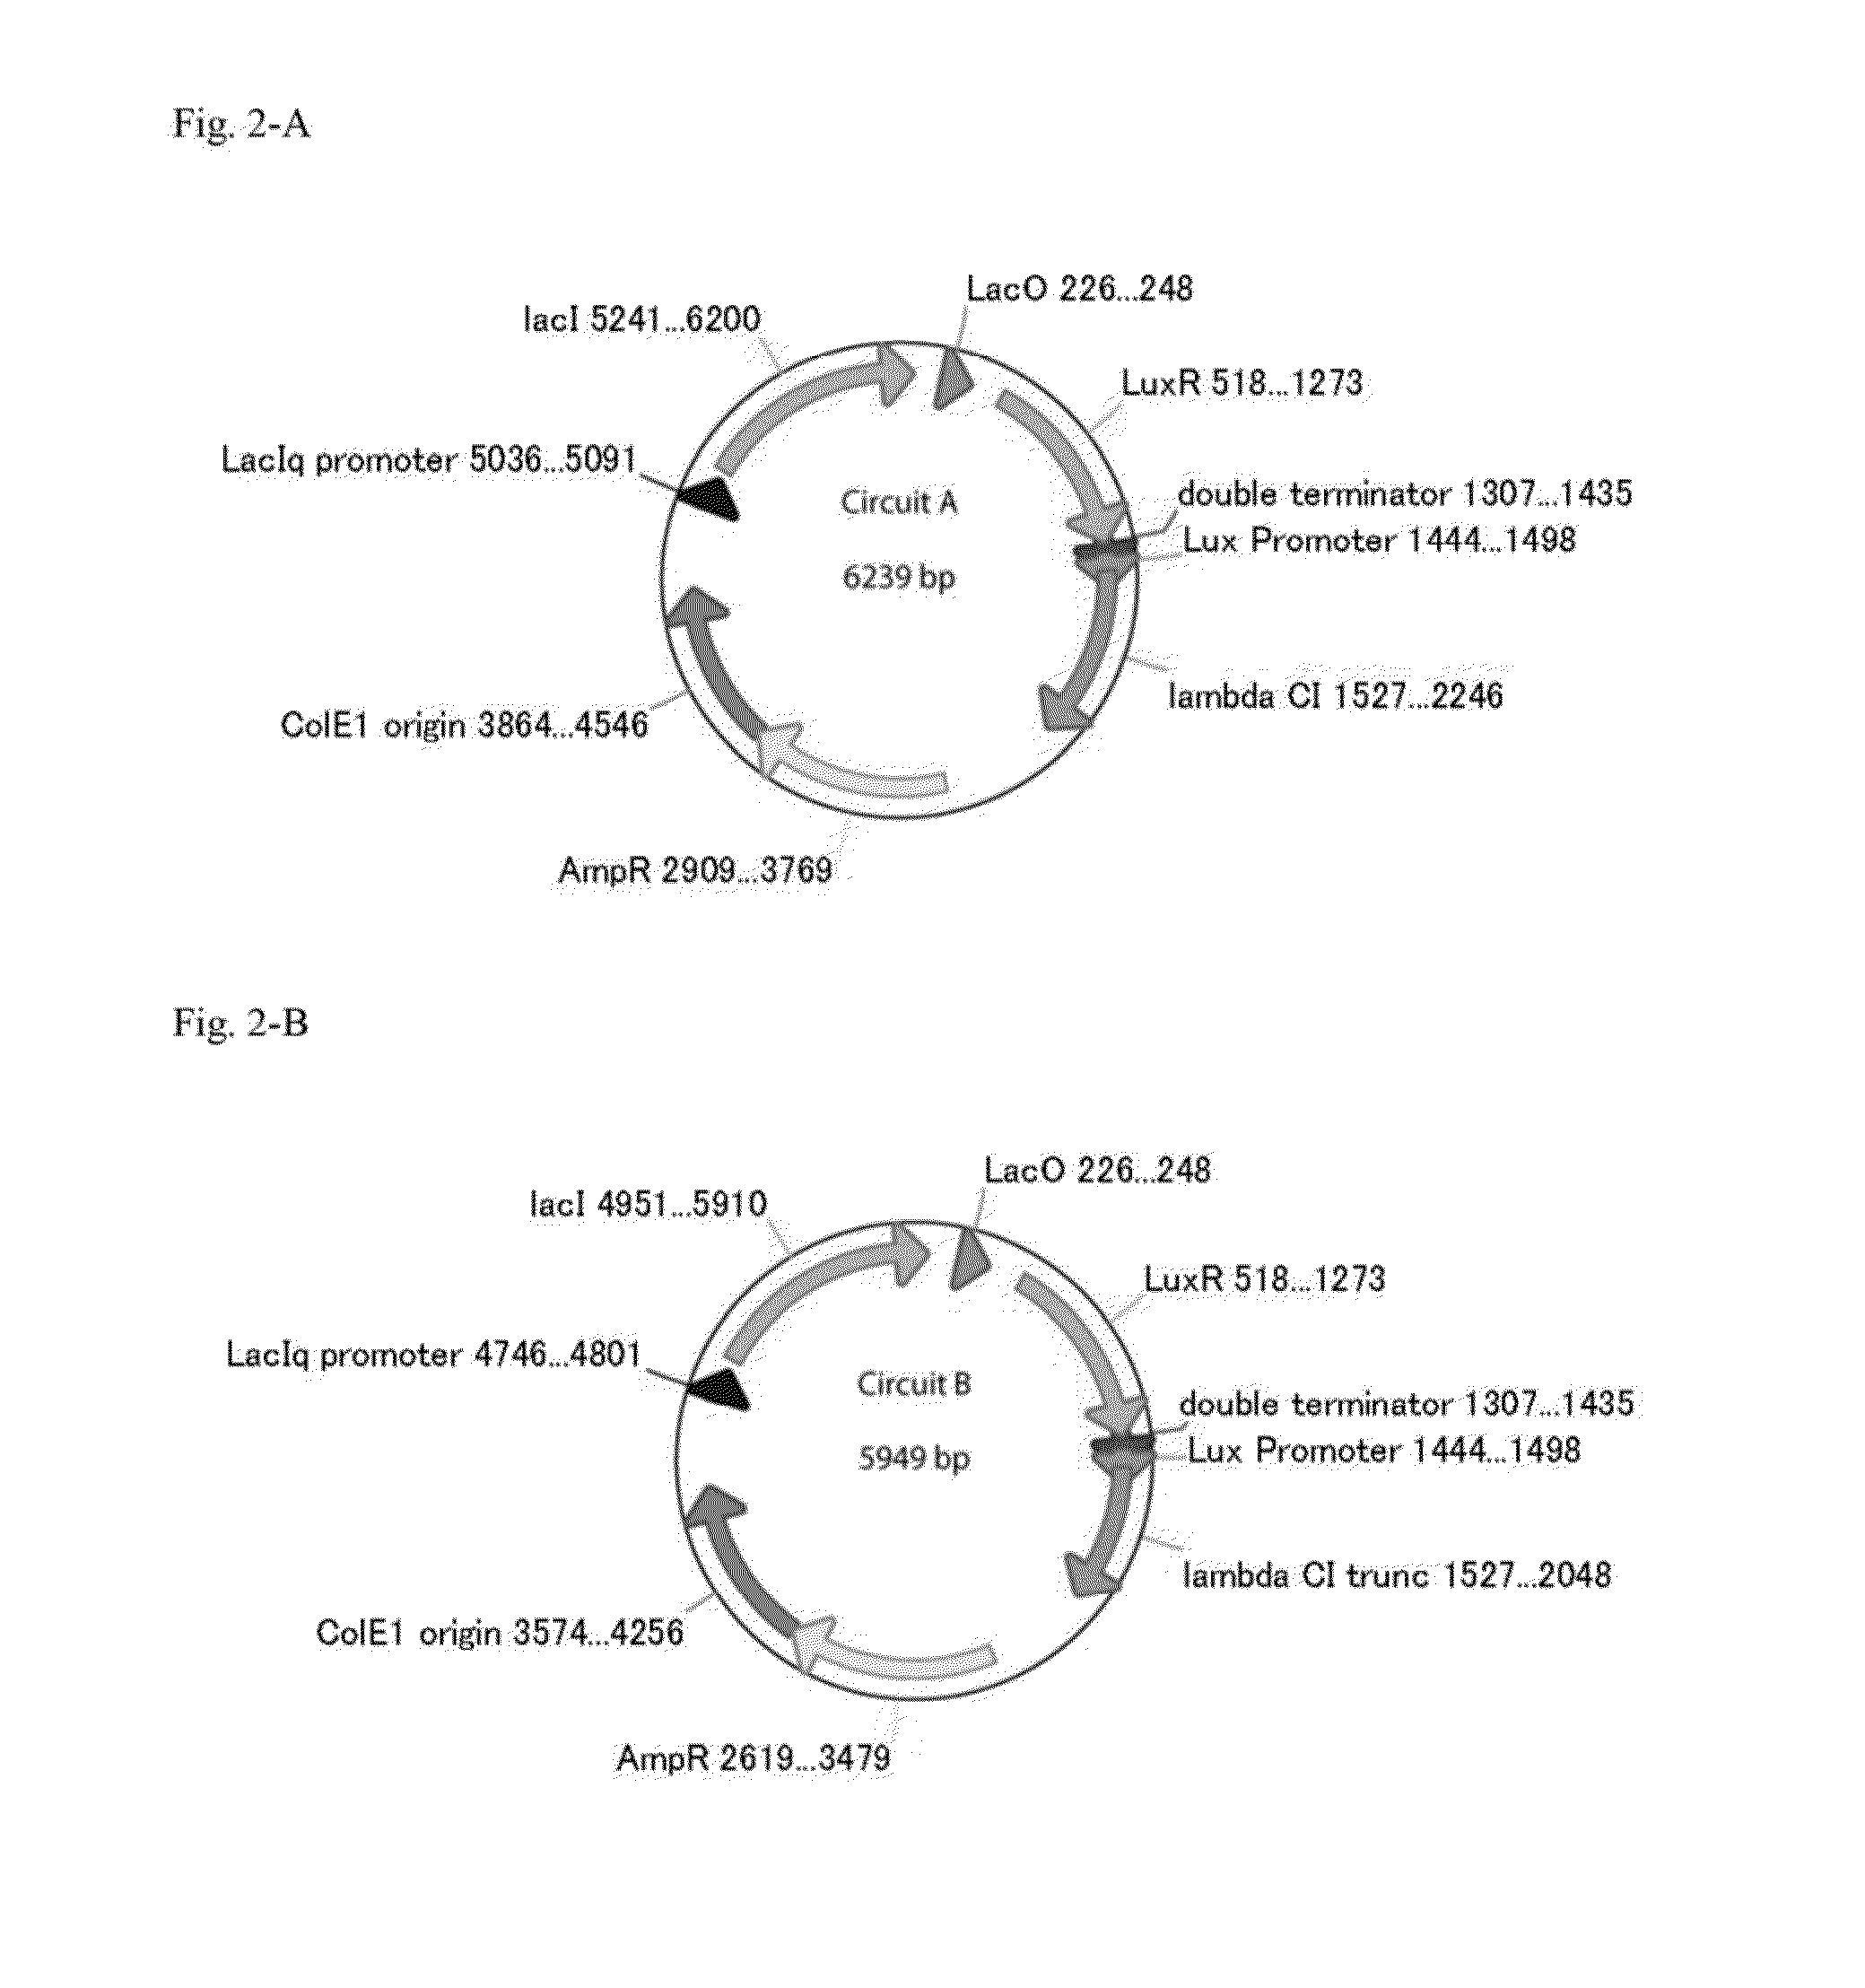 Method for rapidly developing gene switches and gene circuits